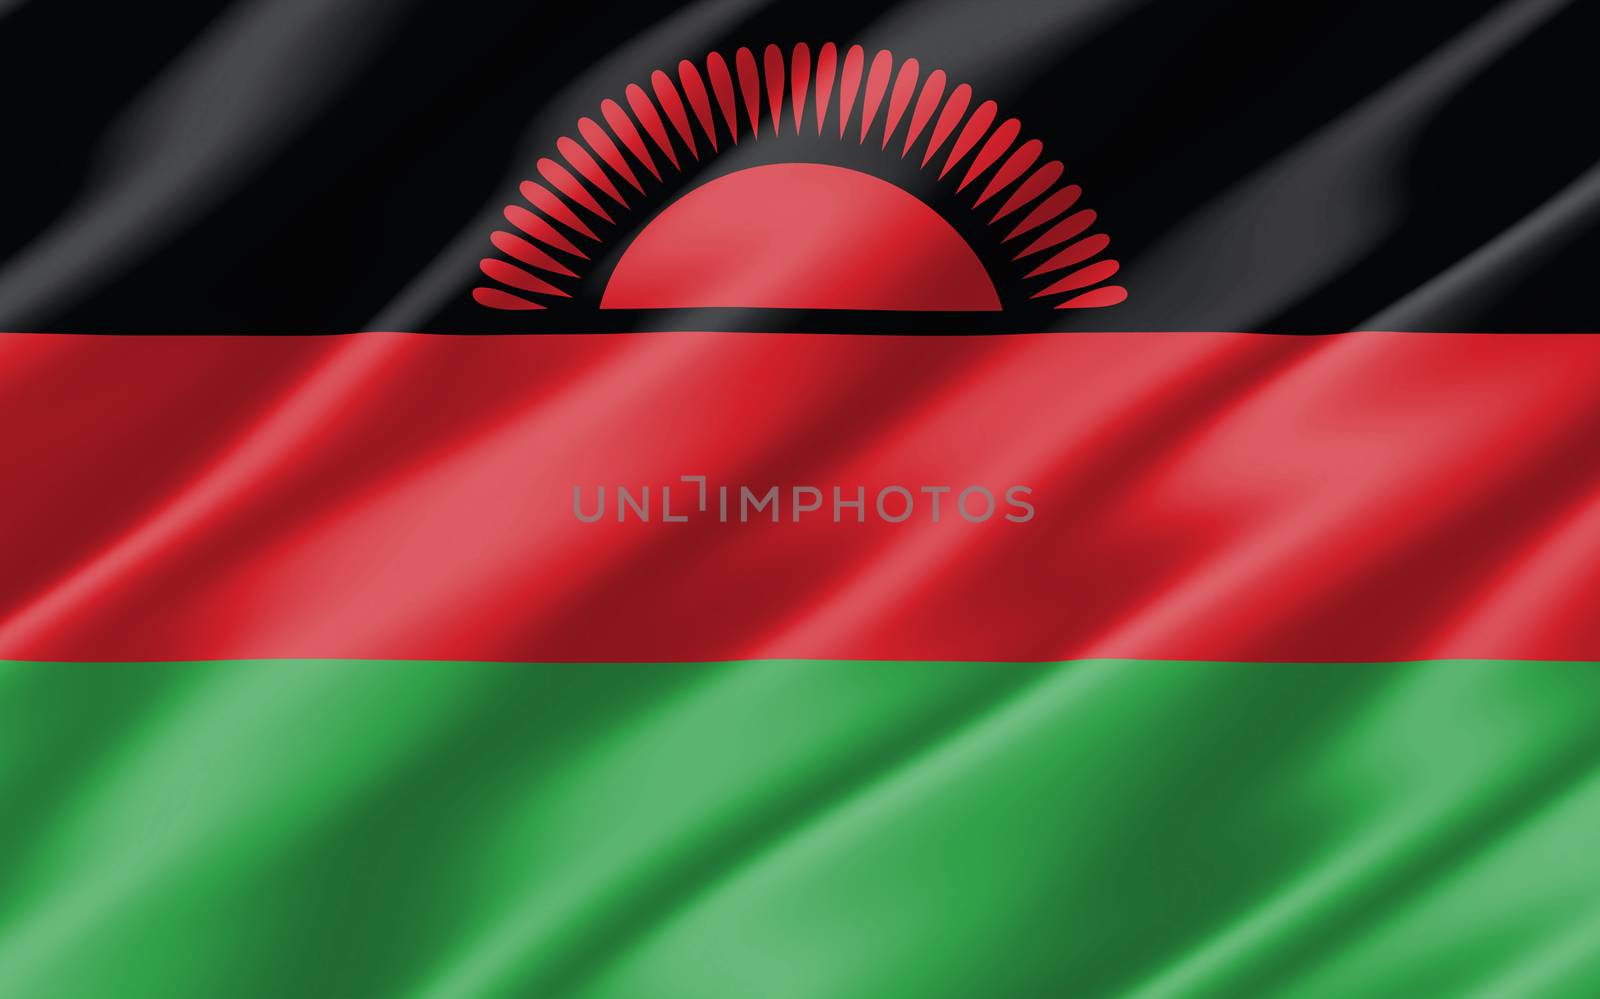 Malawi flag vector graphic. Rectangle Malawian flag illustration. Malawi country flag is a symbol of freedom, patriotism and independence.